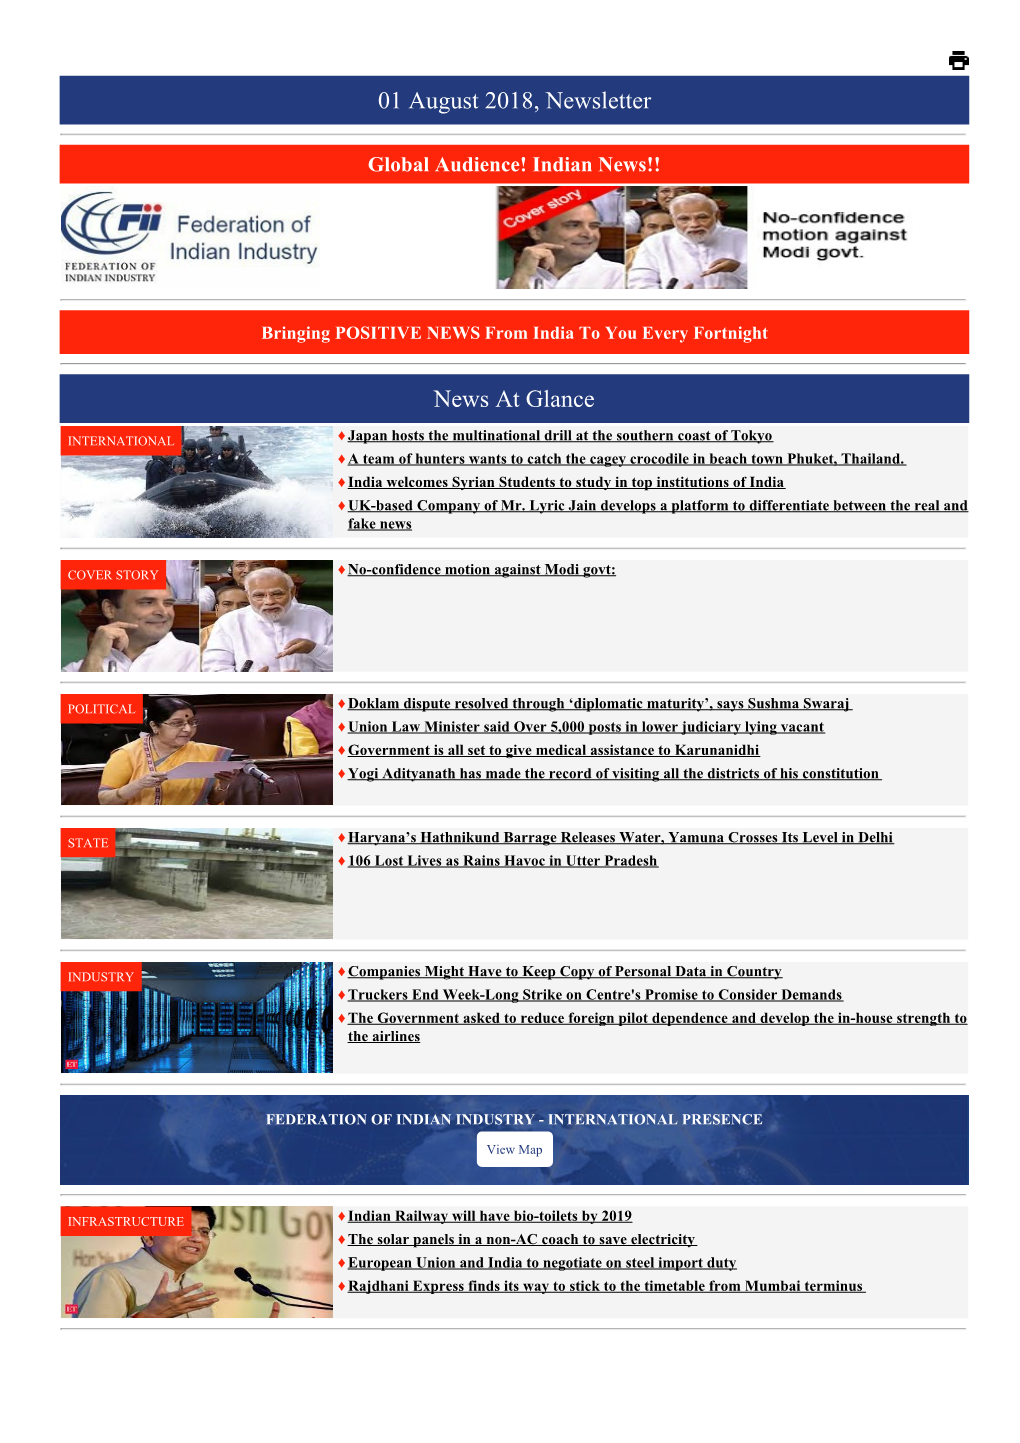 01 August 2018, Newsletter News at Glance